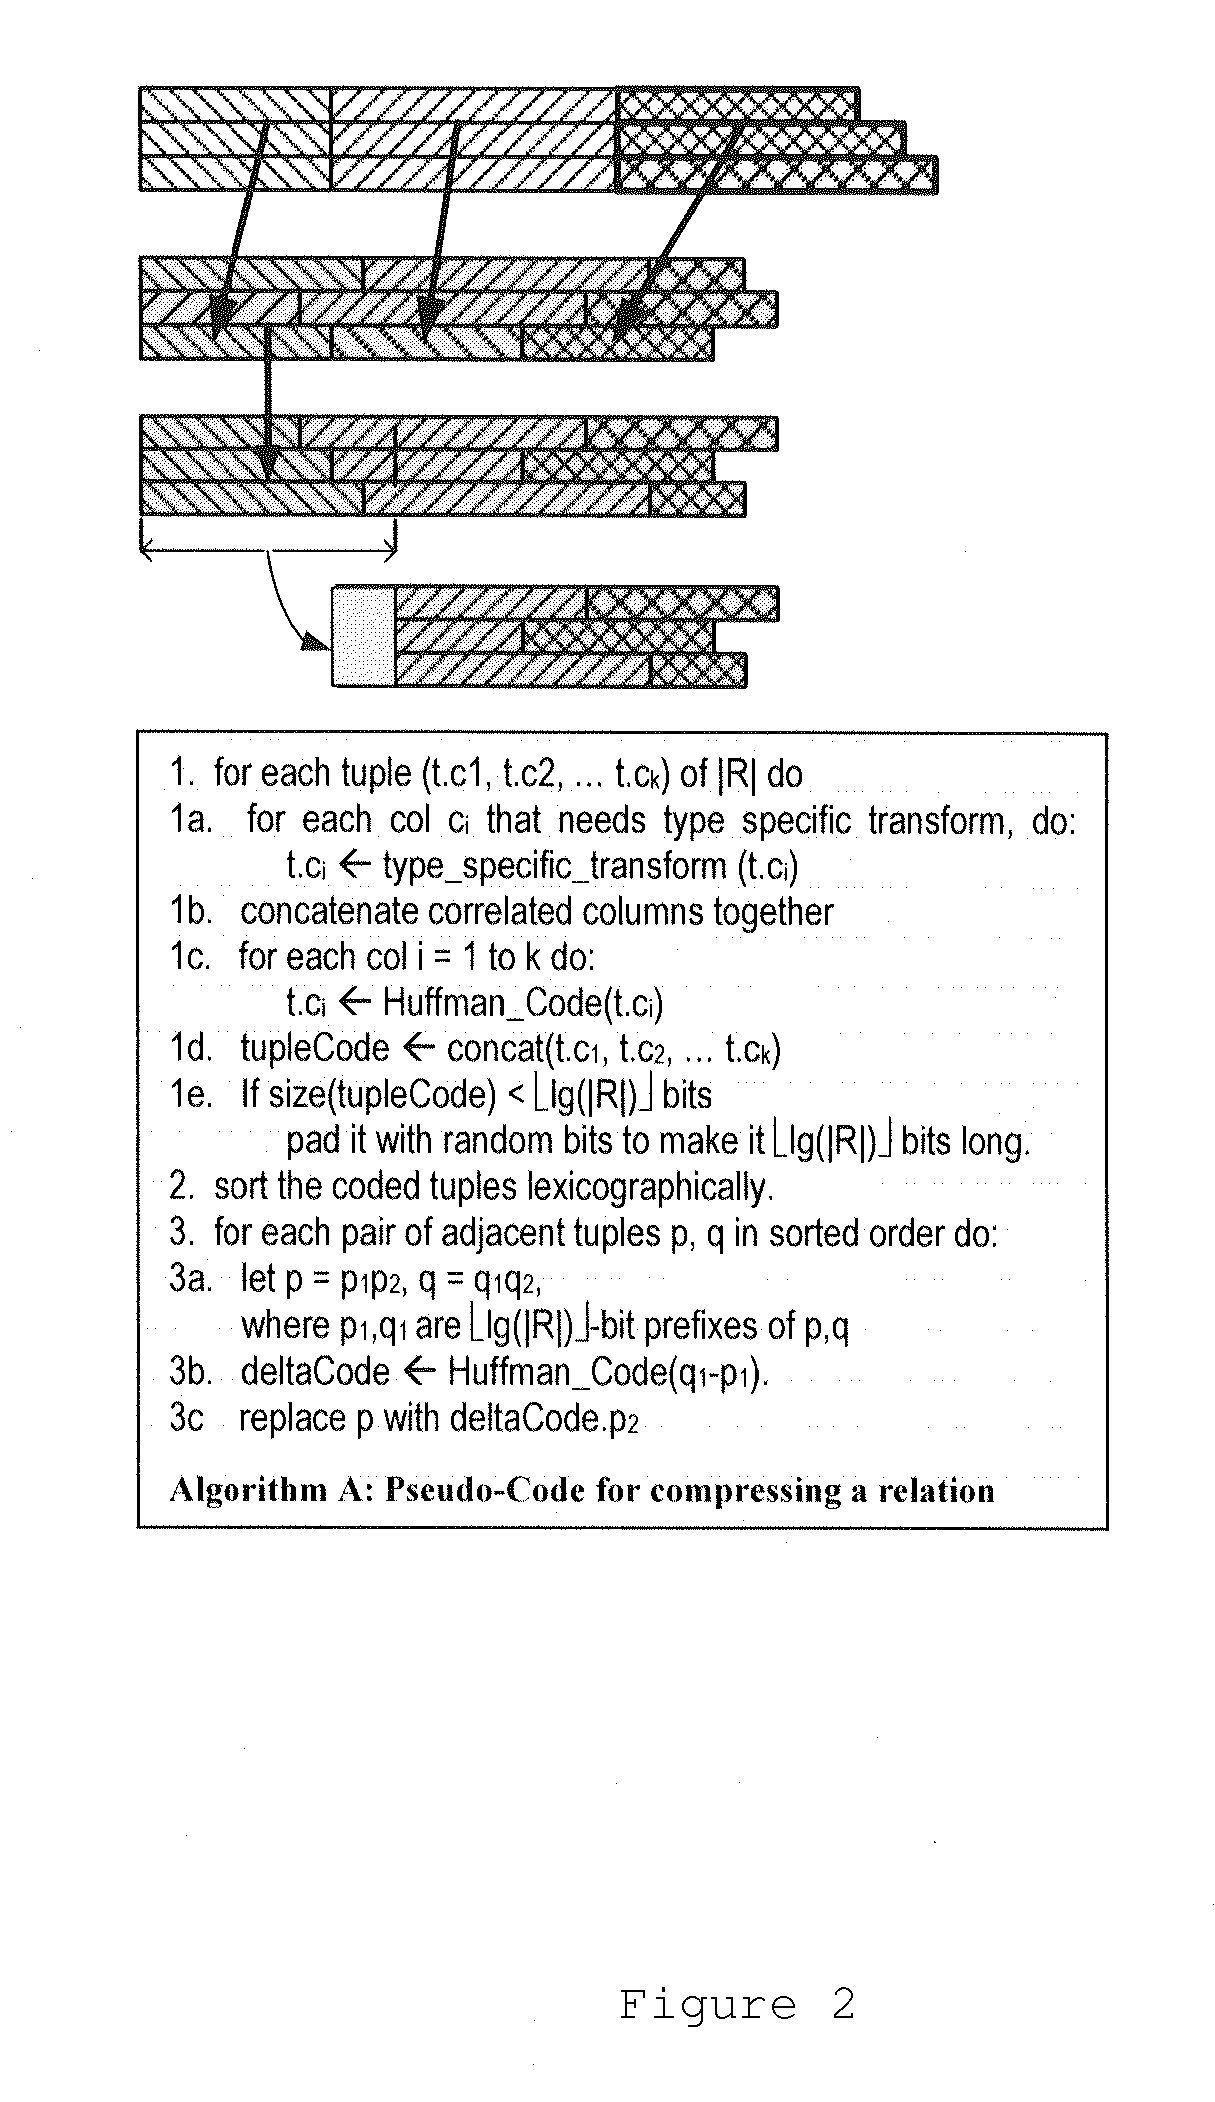 Compression method for relational tables based on combined column and row coding